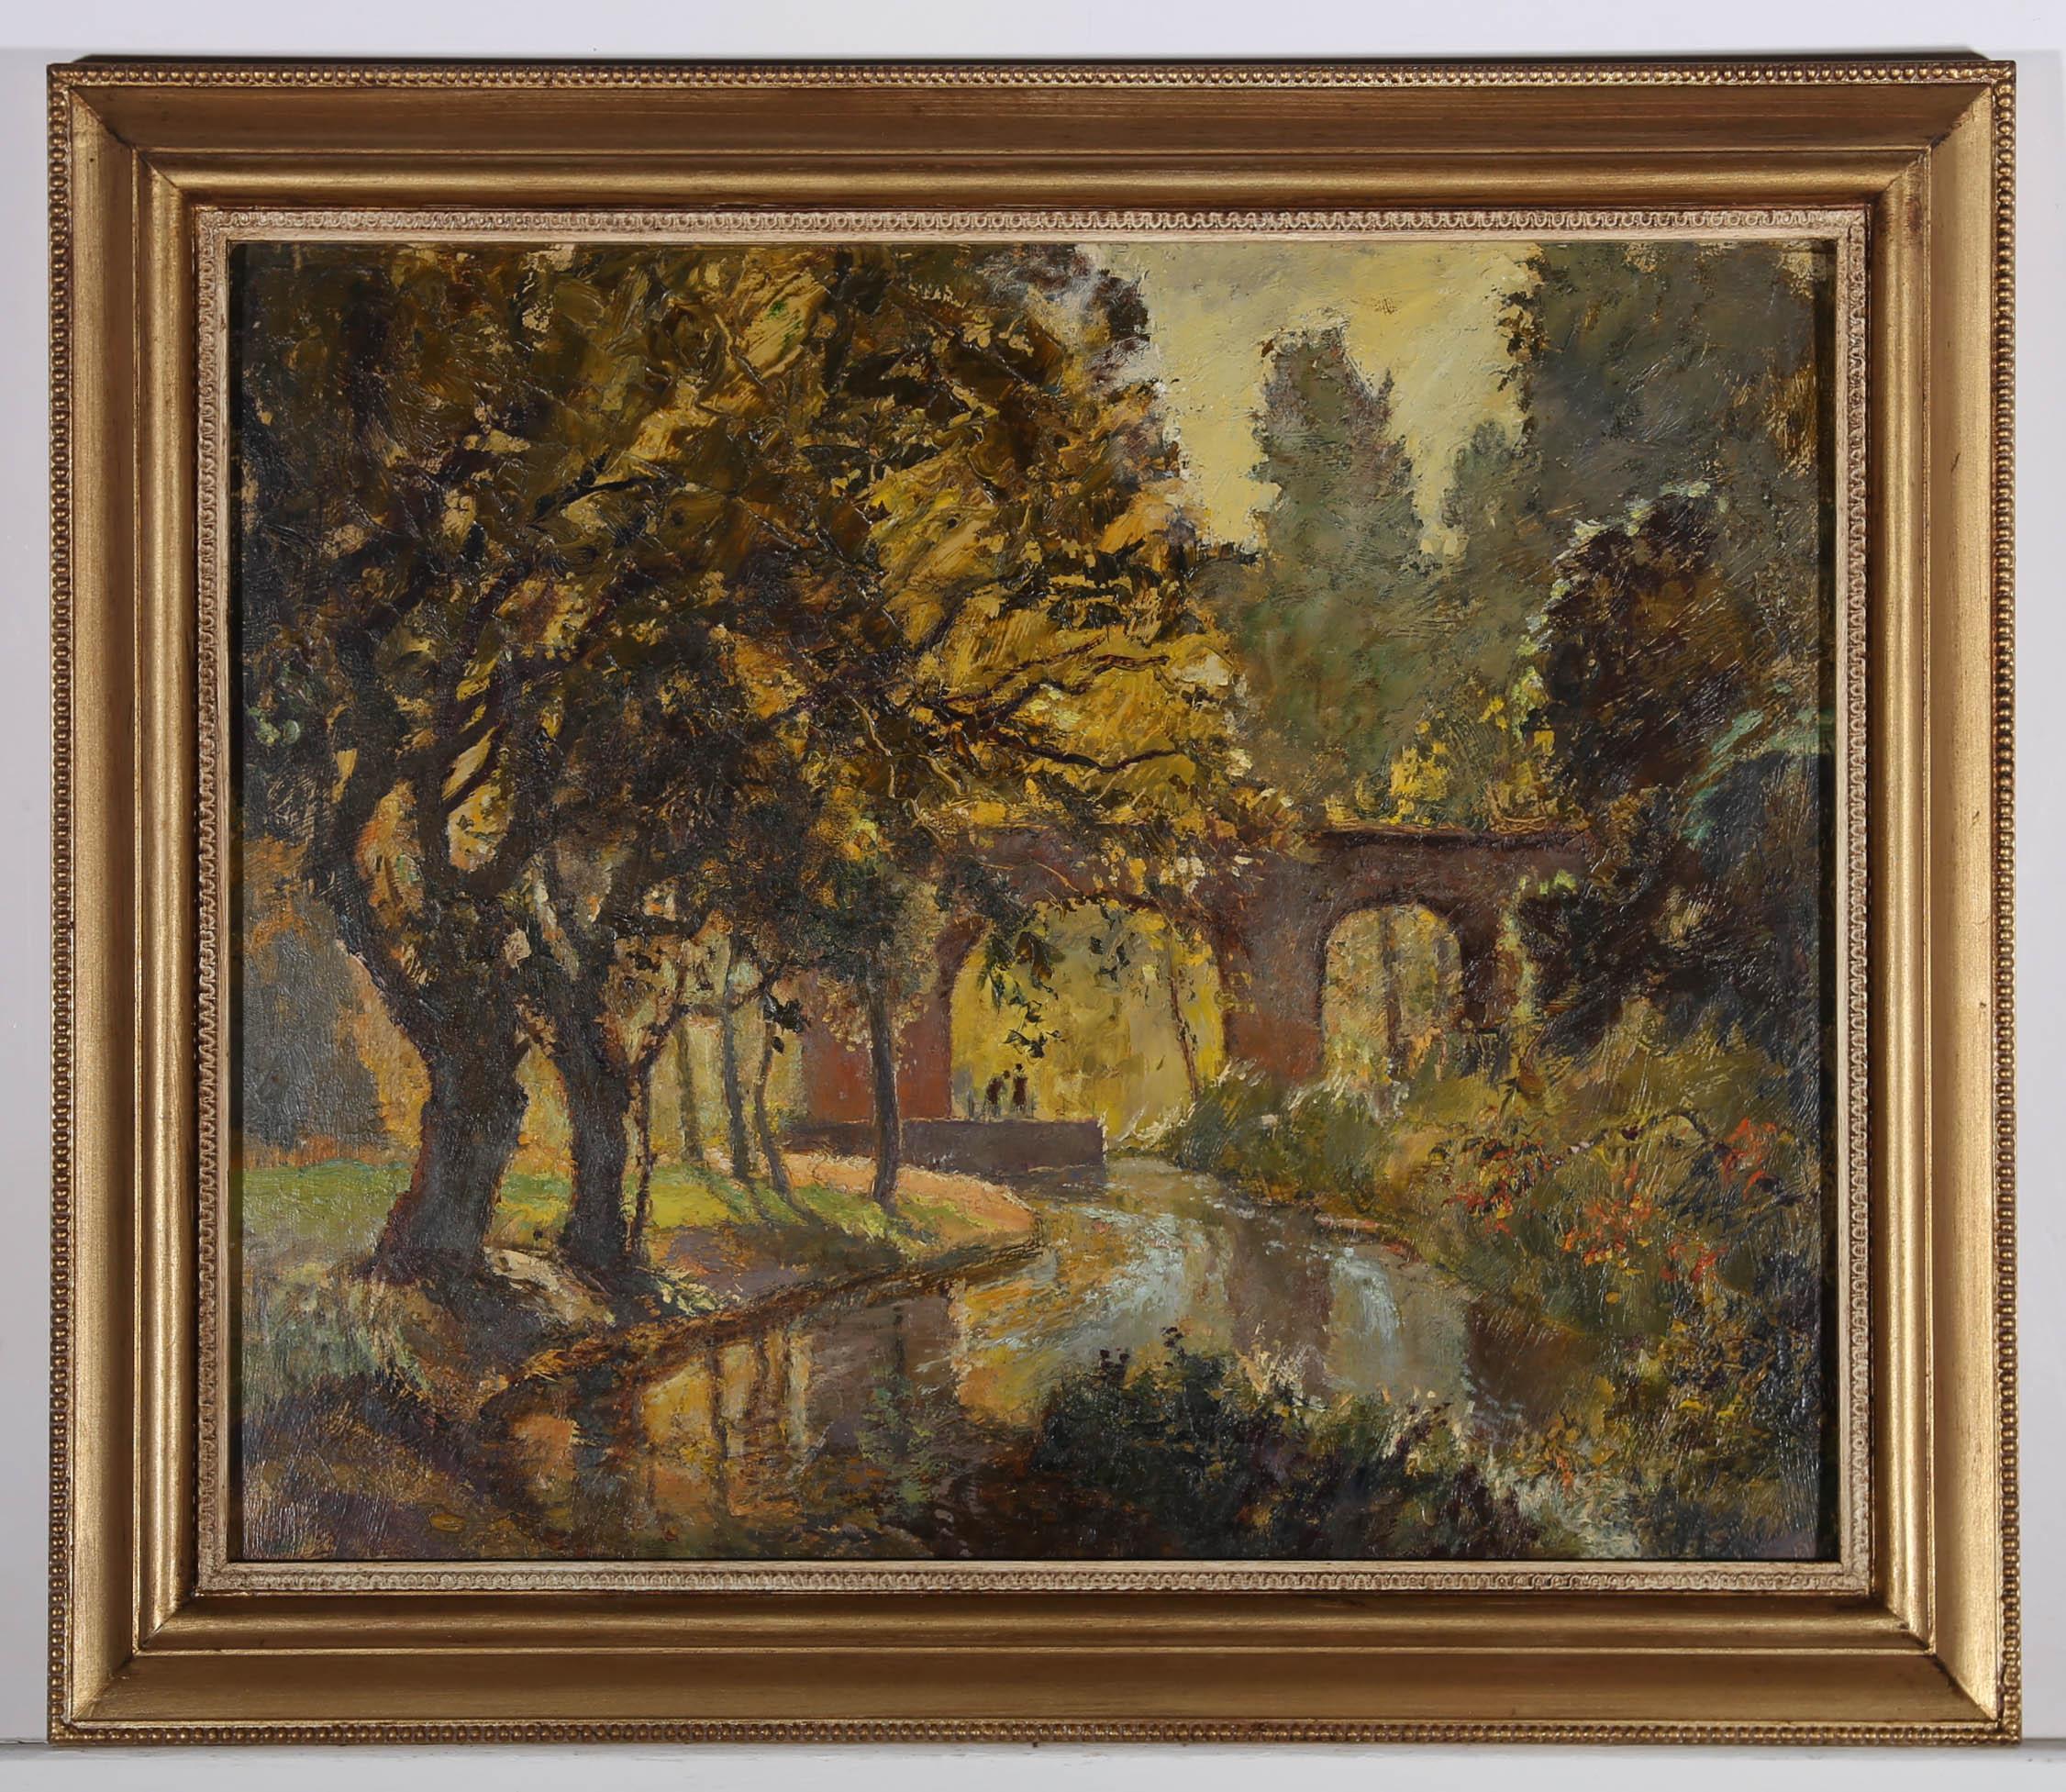 This vibrant impasto scene depicts the end of summer along the canal, with golden trees glowing in the warm sunlight before a railway bridge. Two silhouettes can be seen pictured beneath one of the stone arches, close to the water's edge. Unsigned.